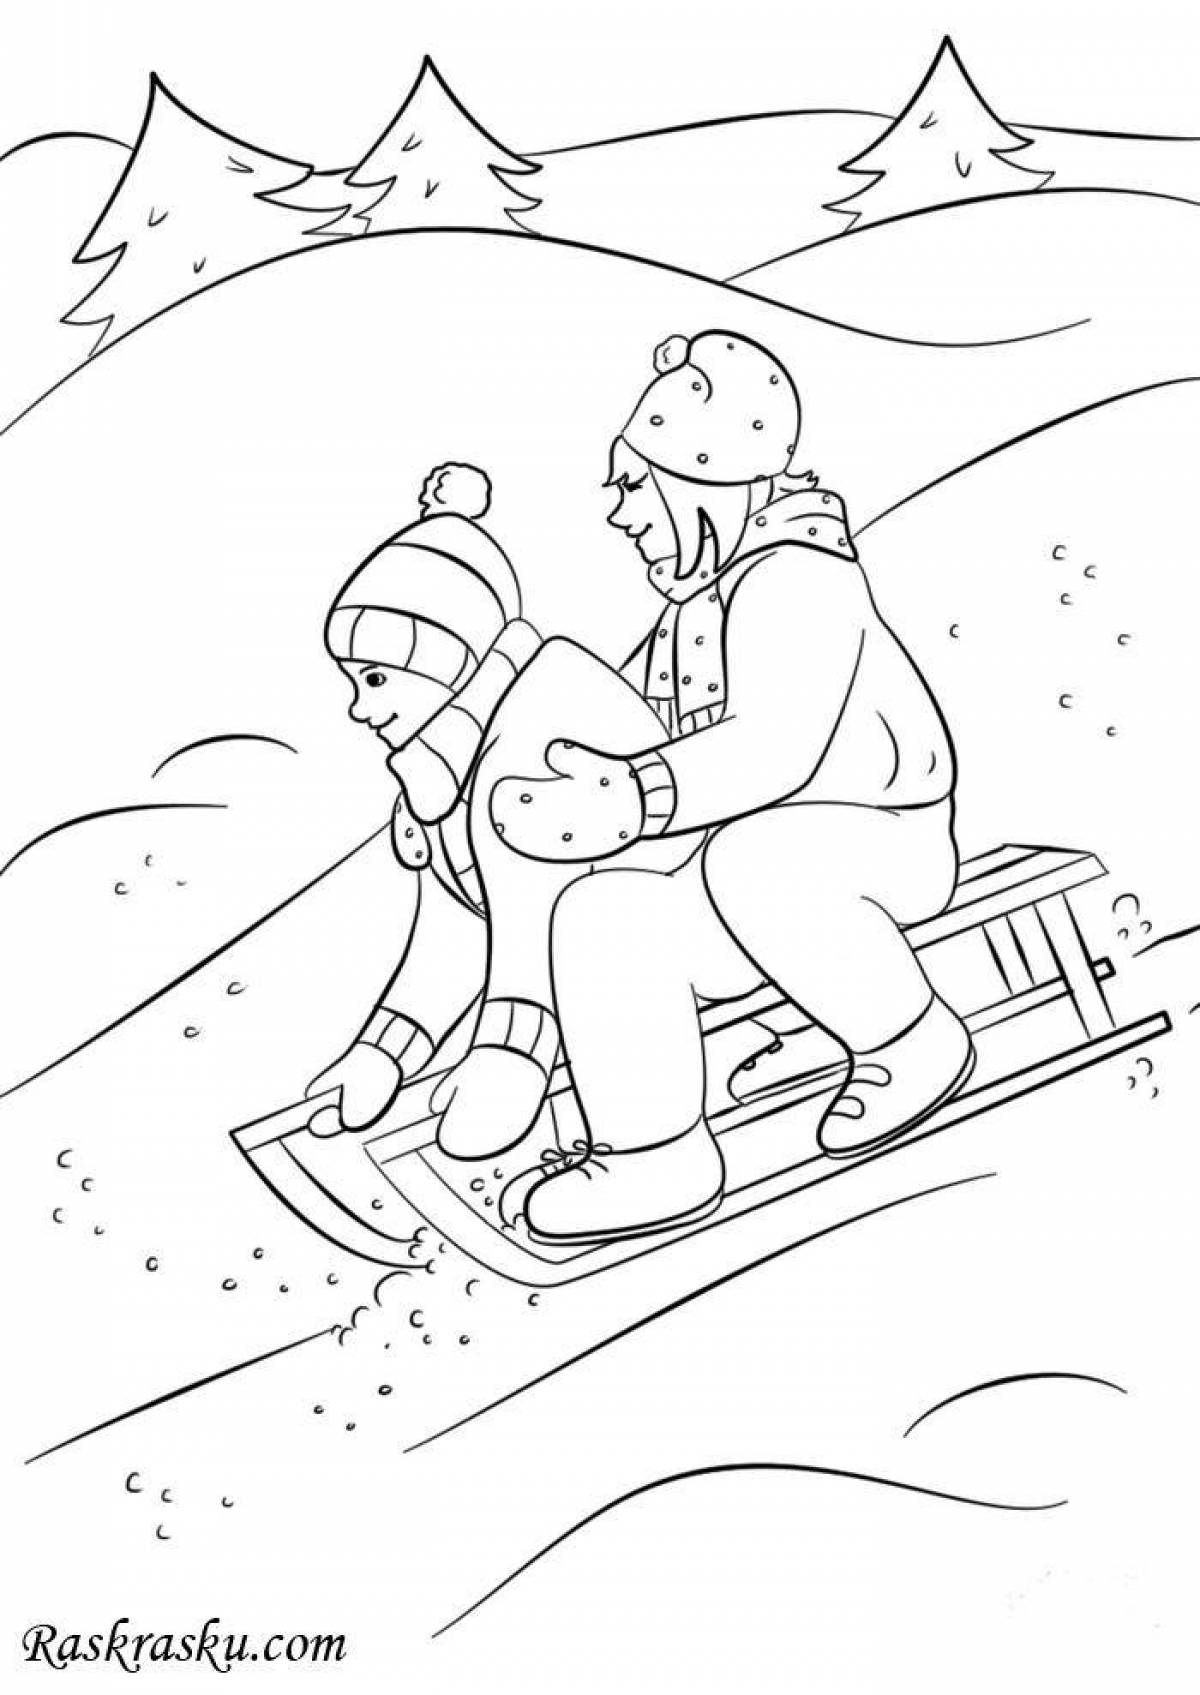 Coloring book of a cheerful child on a sled